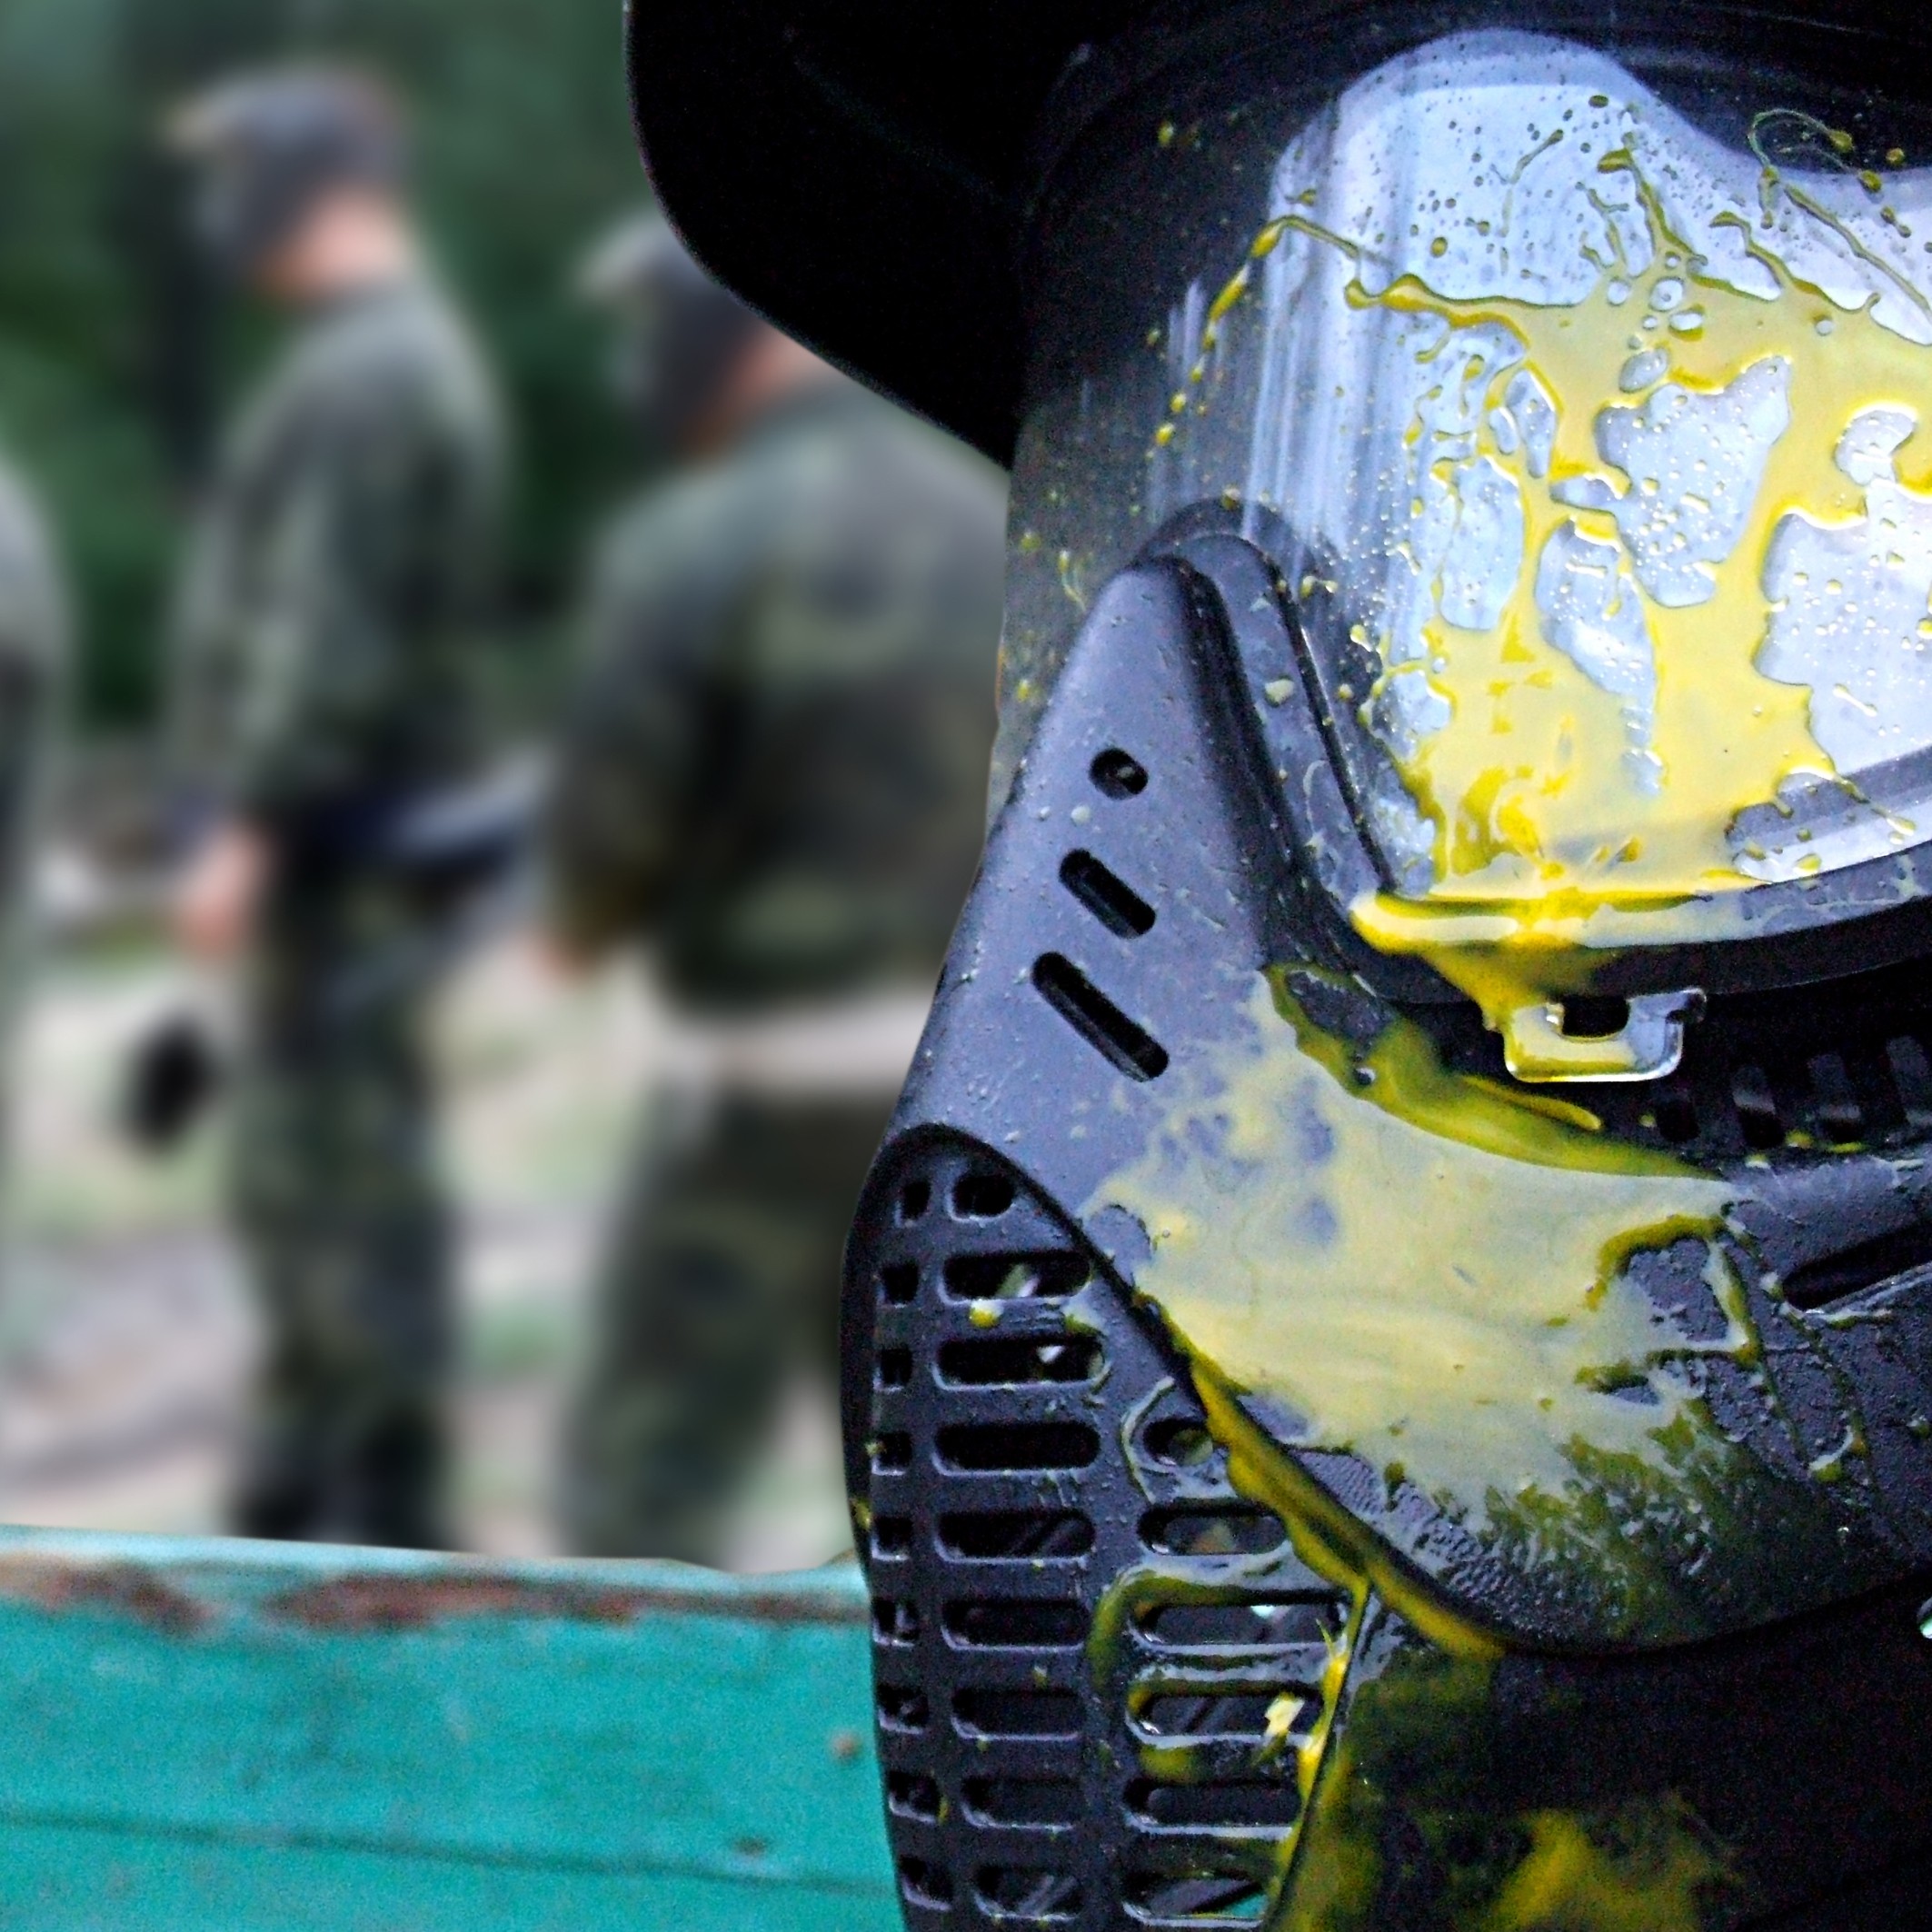 Paintball Voucher Cadou - Paintball 6 persoane, 300 bile/jucator, Ilfov, smartexperience.ro